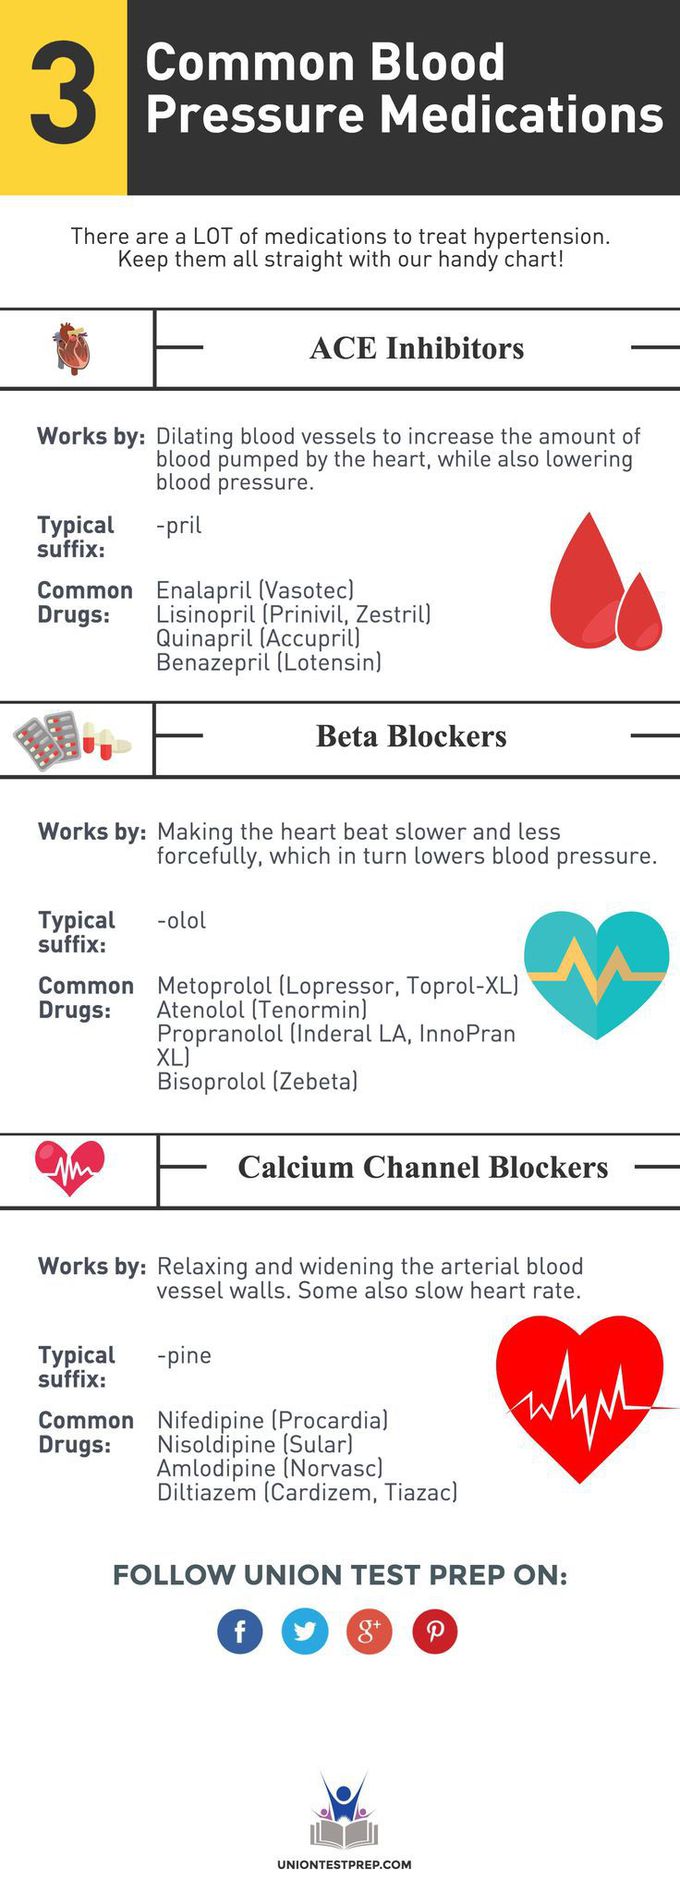 Common Blood Pressure Medications